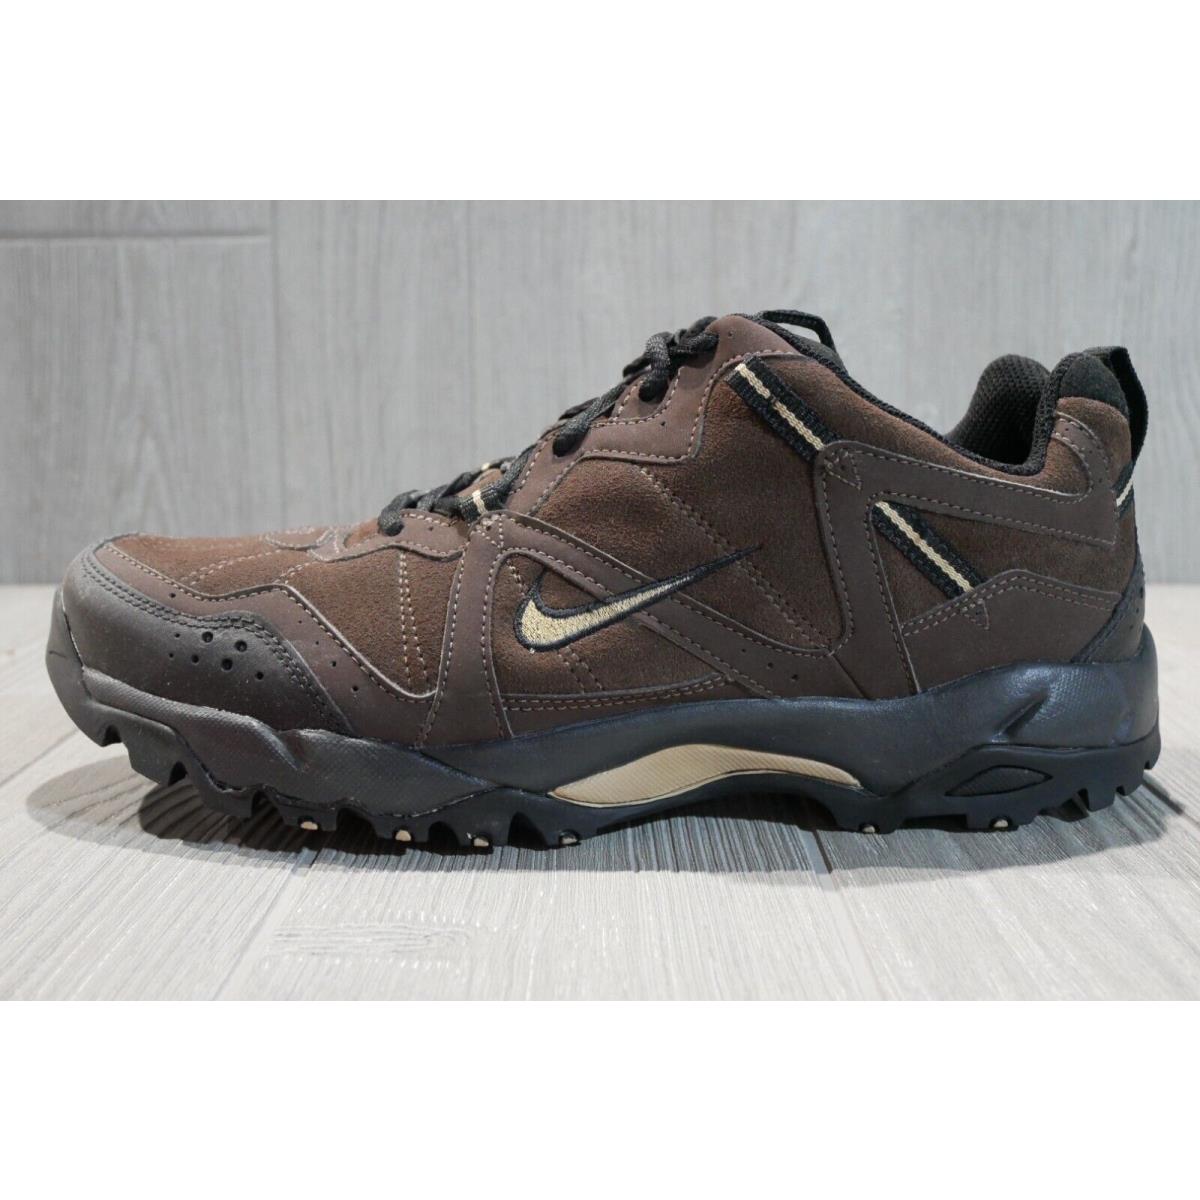 Vintage Nike Bandolier II Leather Hiking Shoes Boots 2007 Mens 12 Oss